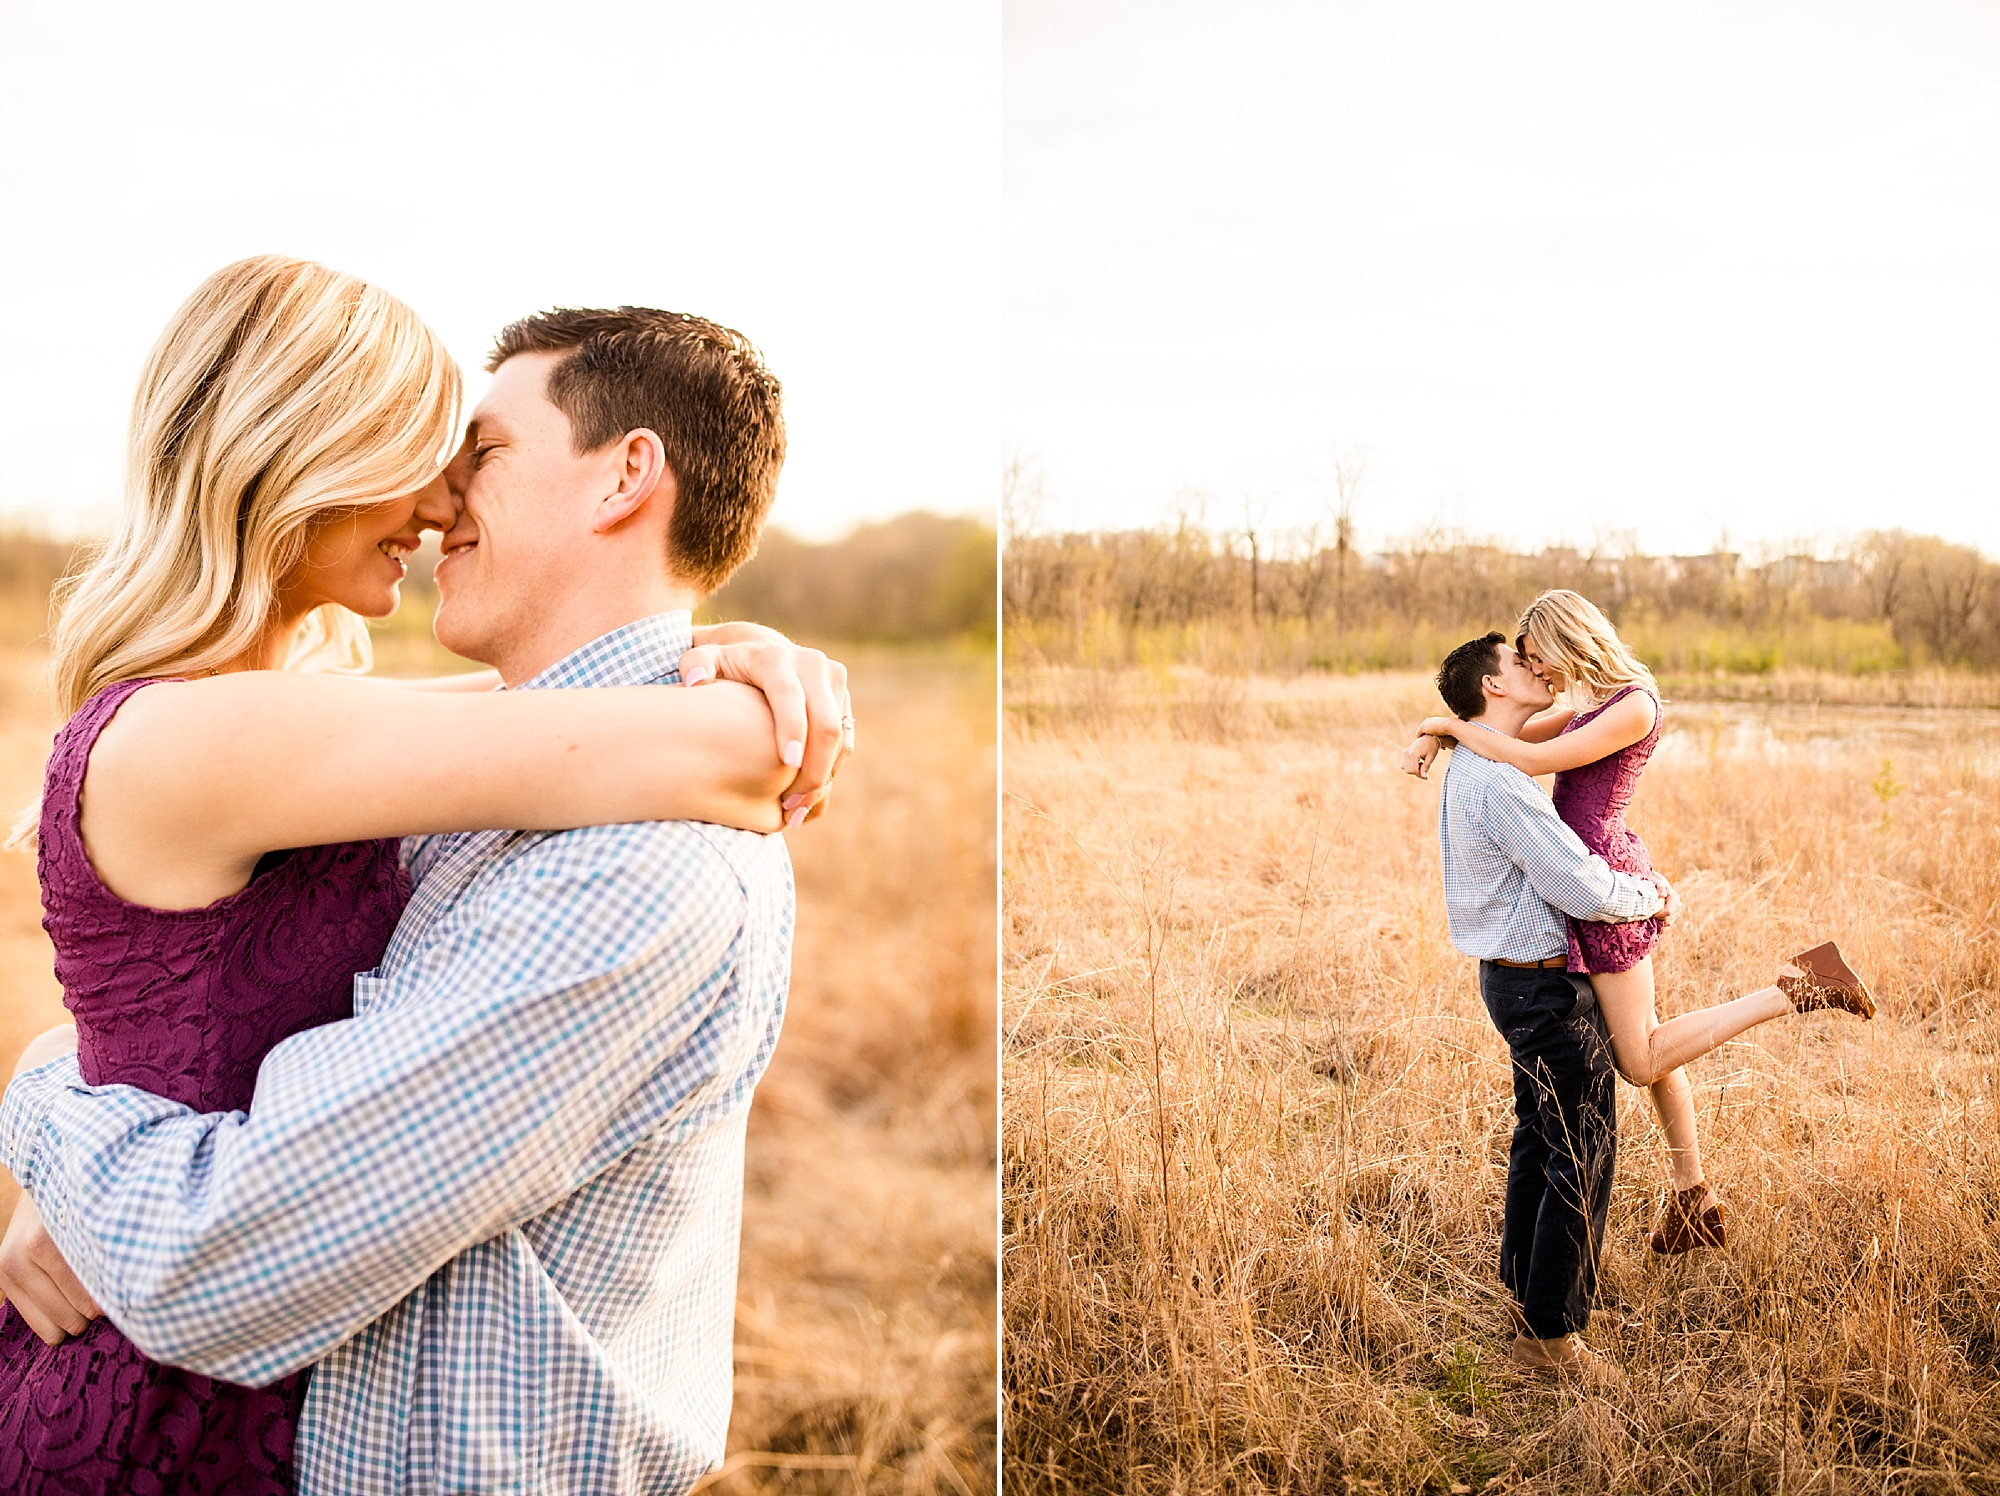 Picking fiance up in the middle of a field for engagement photos